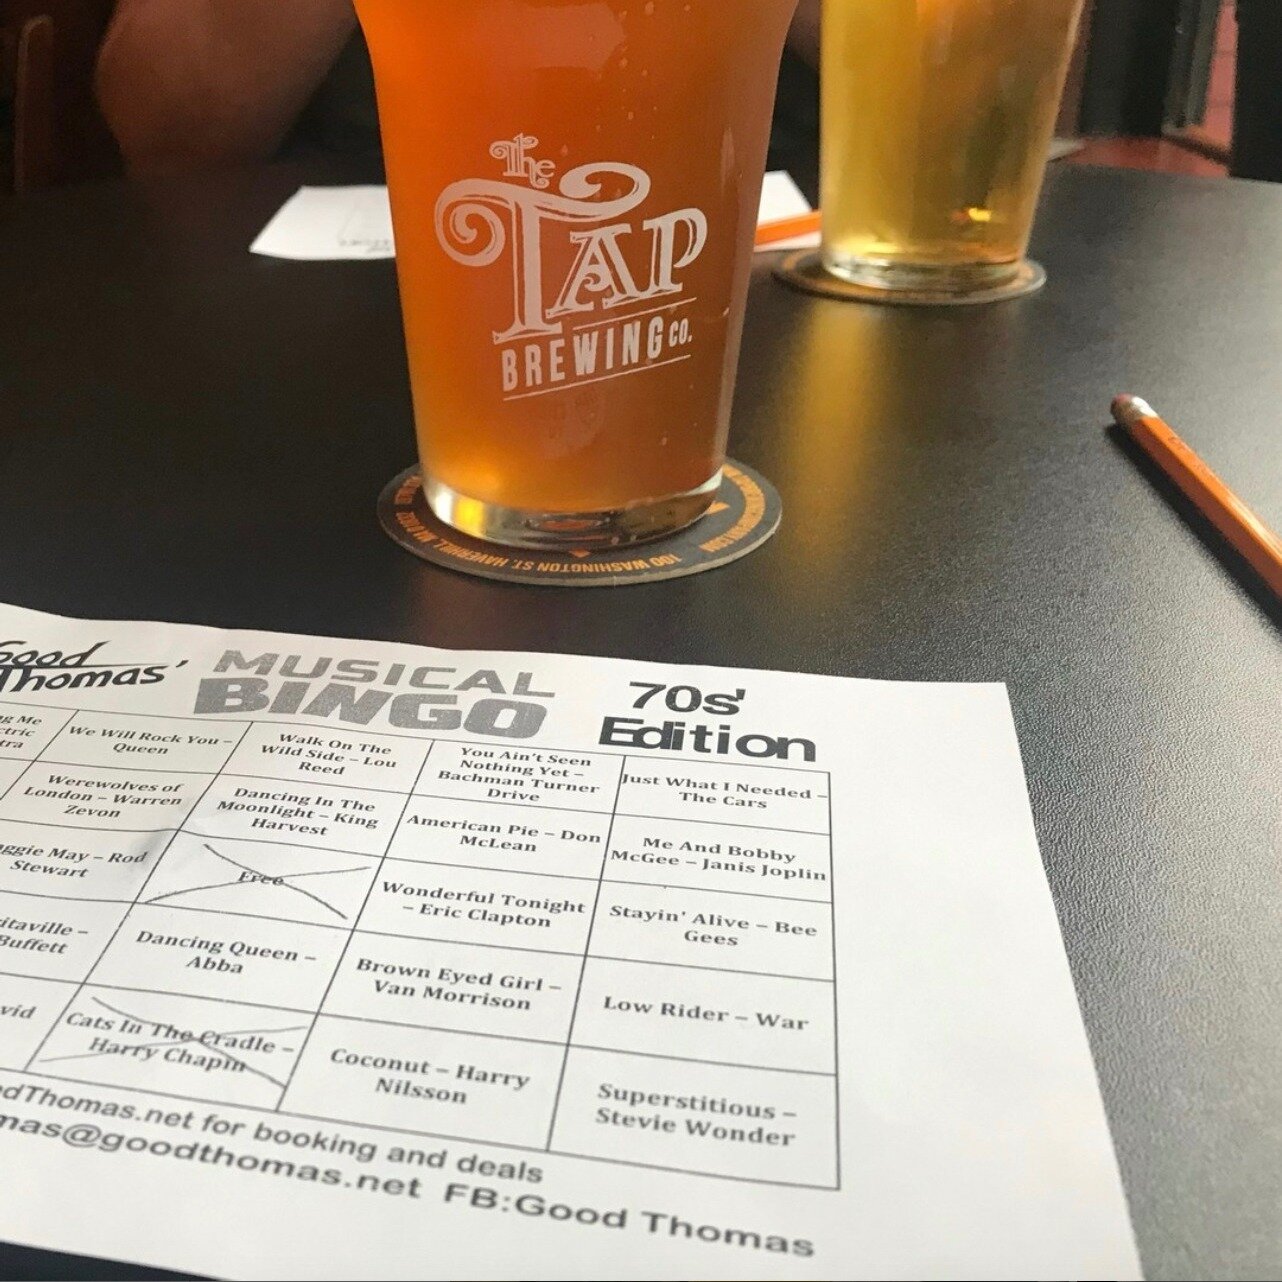 Tonight at 7pm, Musical Bingo at The Tap! Bring your friends and love for music for your chance to win!
#musicalbingo #goodthomas #tonightat7pm #freetoplay #prizes #tapbrewingcompany